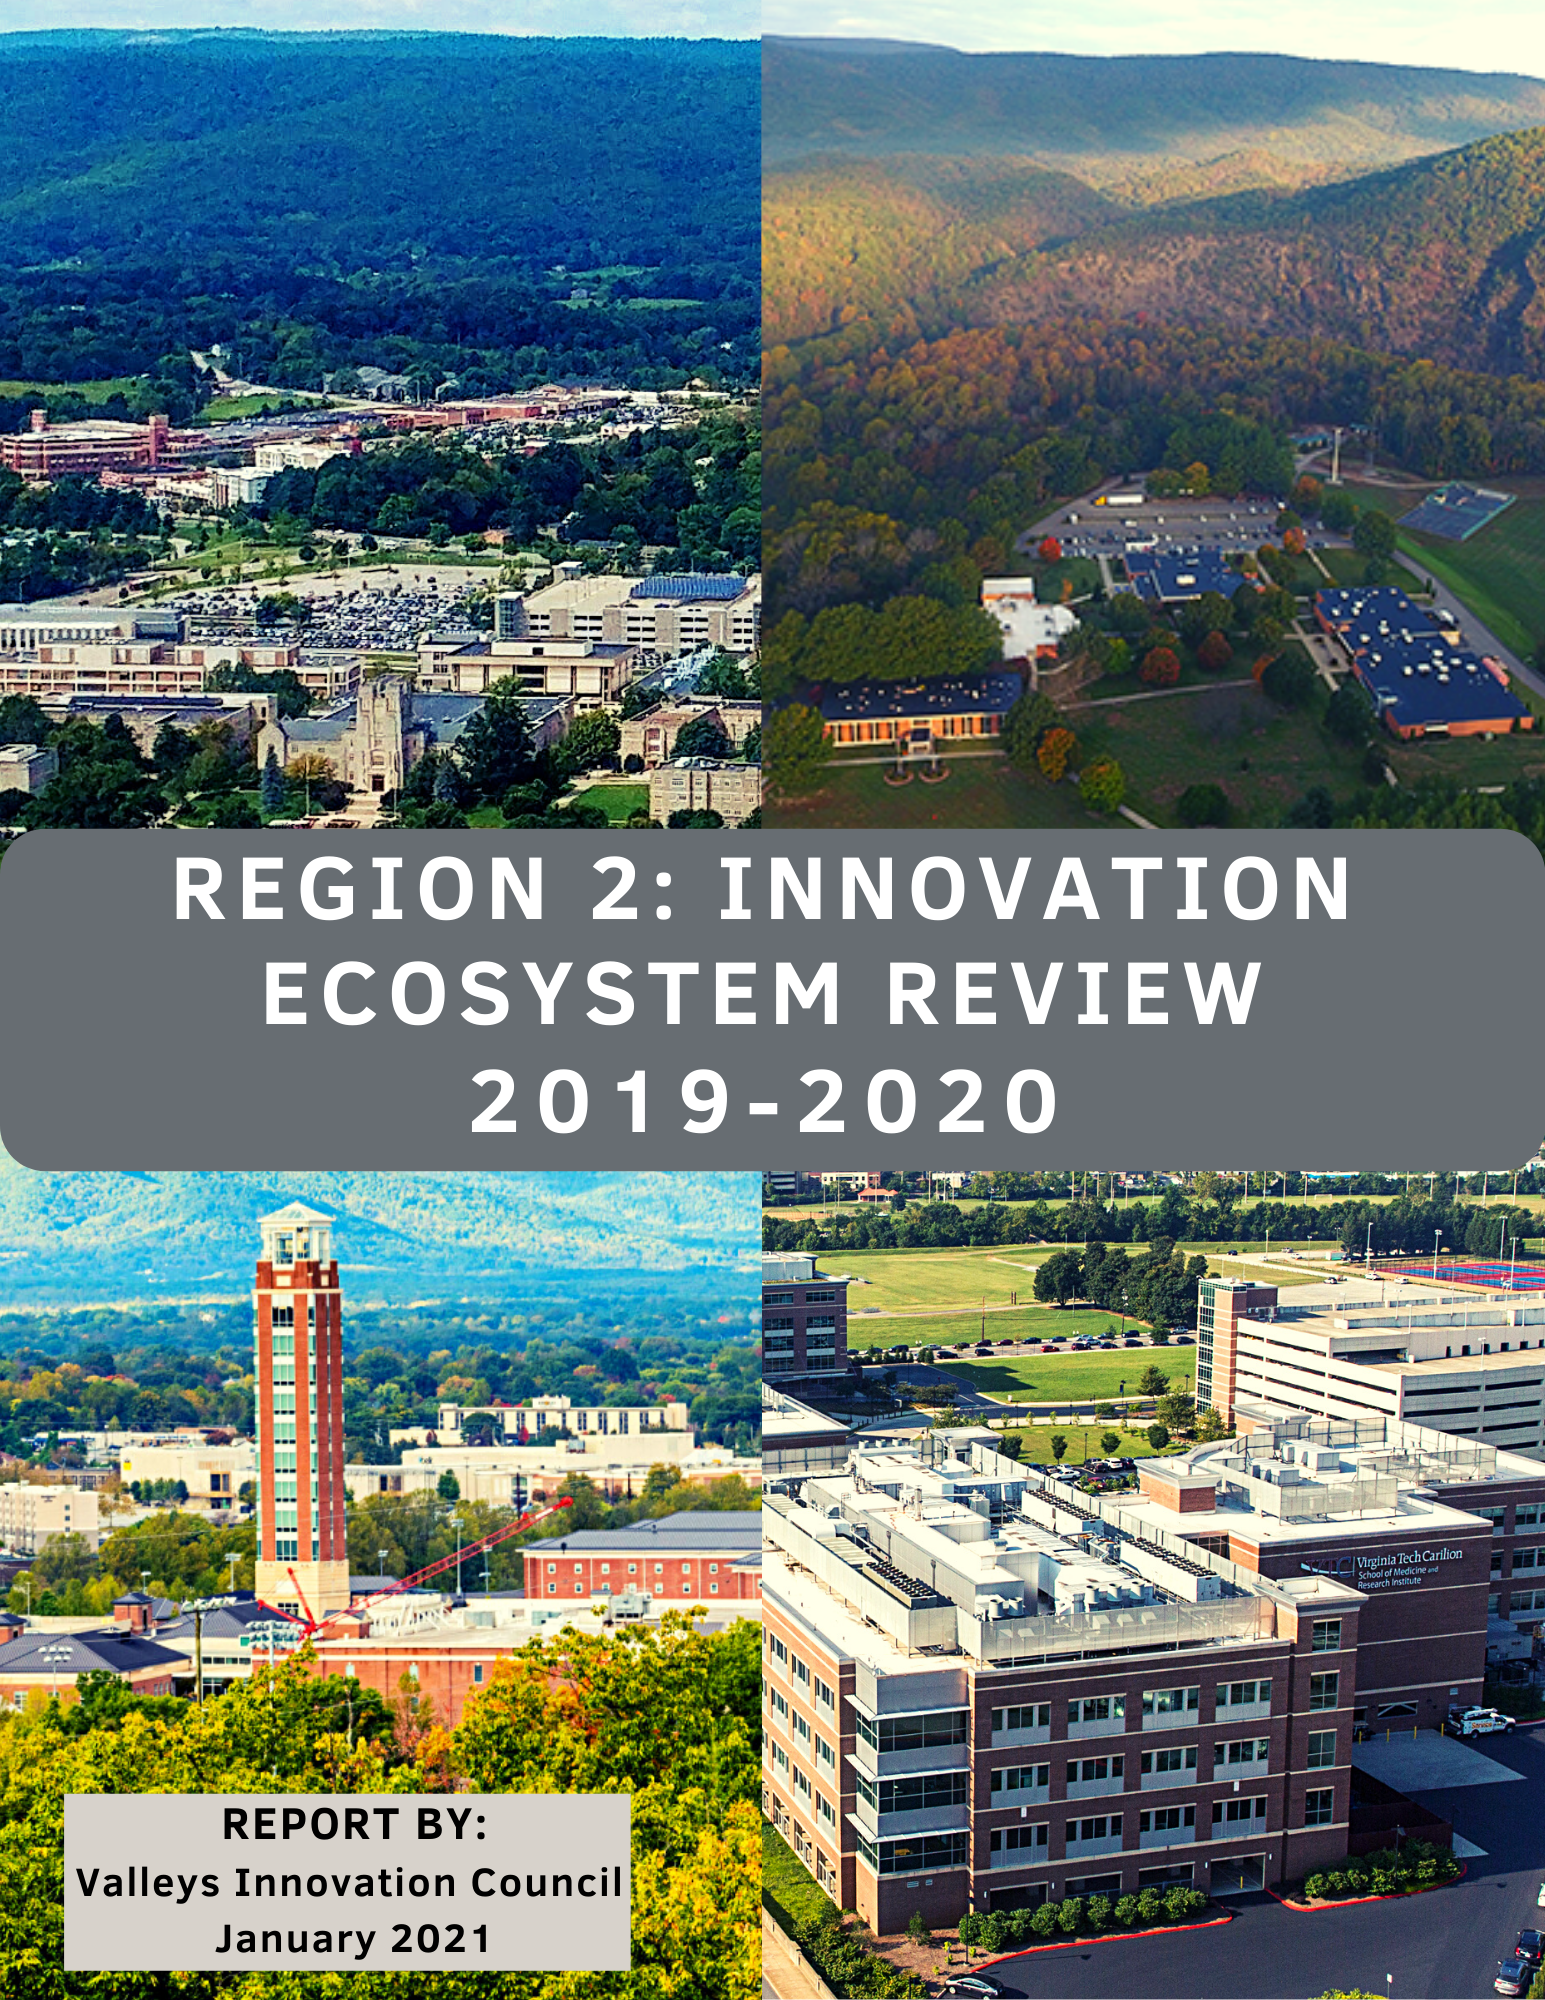 Learn more about the Region 2 Innovation Ecosystem in 2019-2020 with this report from Valleys Innovation Council.